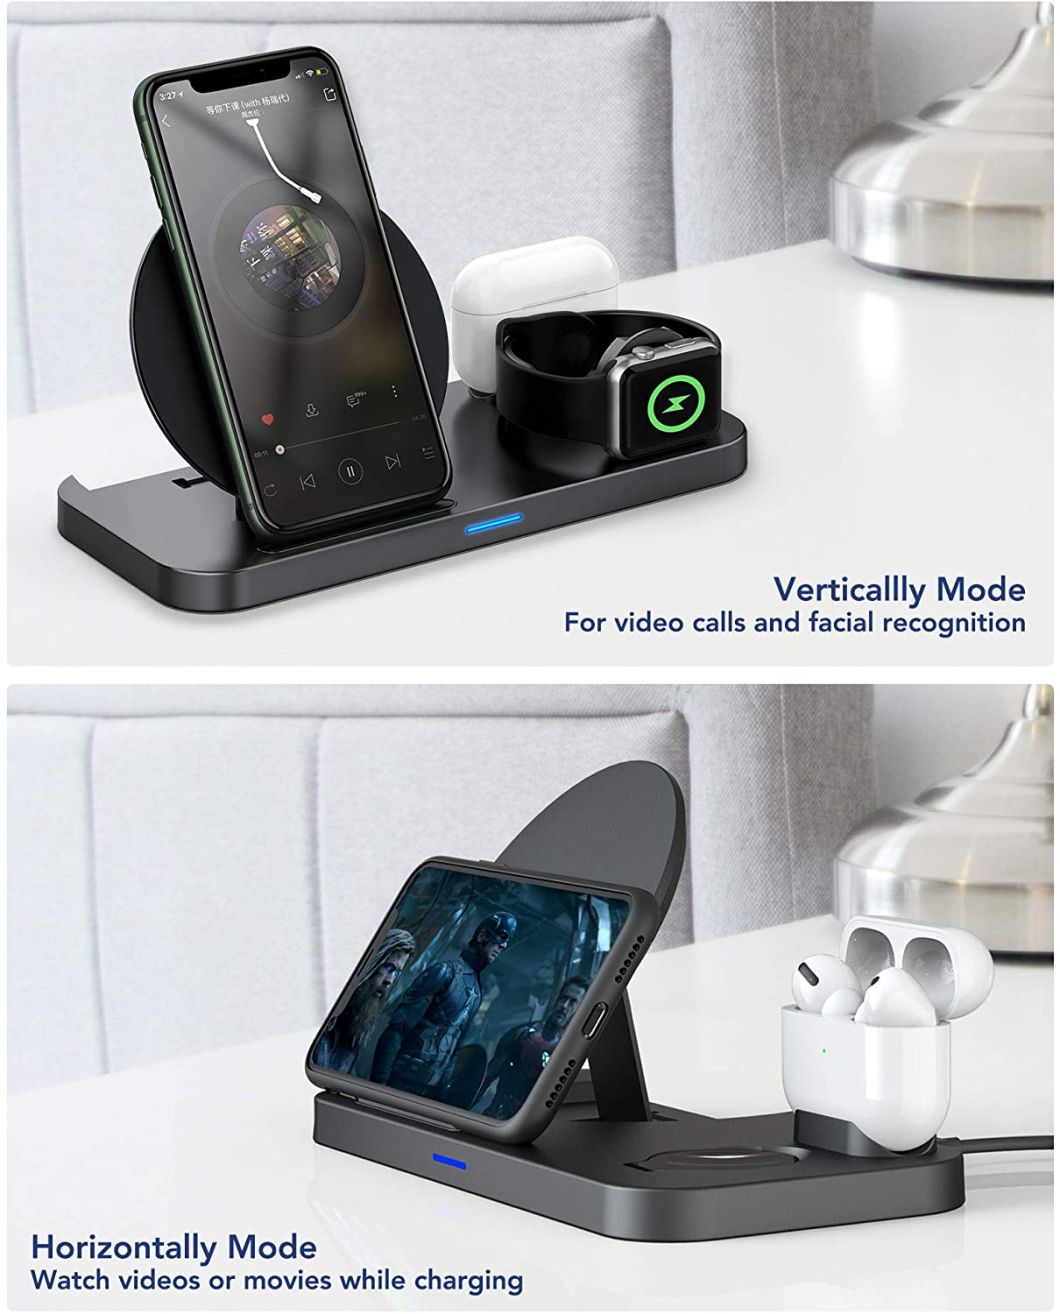 2020 Latest Wireless Charger, 3 in 1 Qi-Certified Wireless Charging Station for Airpods/Apple Watch Series 6/5/4/3/2/1, Fast Wireless Charging Stand.